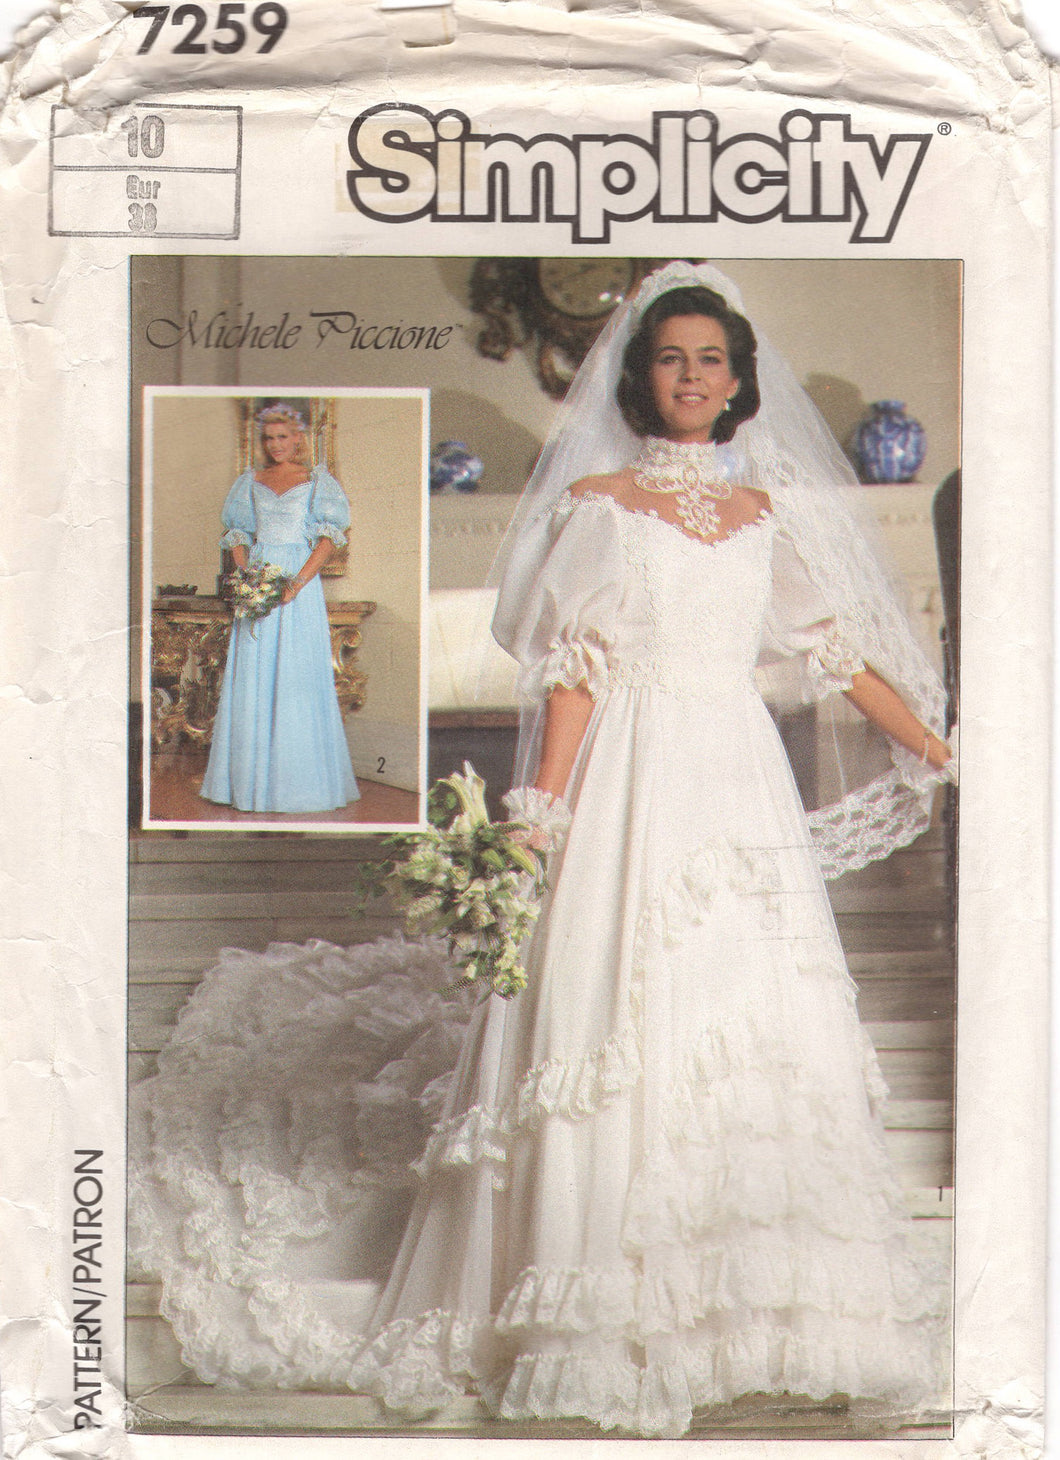 1980's Simplicity Wedding Dress with High or Sweetheart Neckline, Train, and Puff Sleeves pattern - Michele Piccione - Bust 32.5